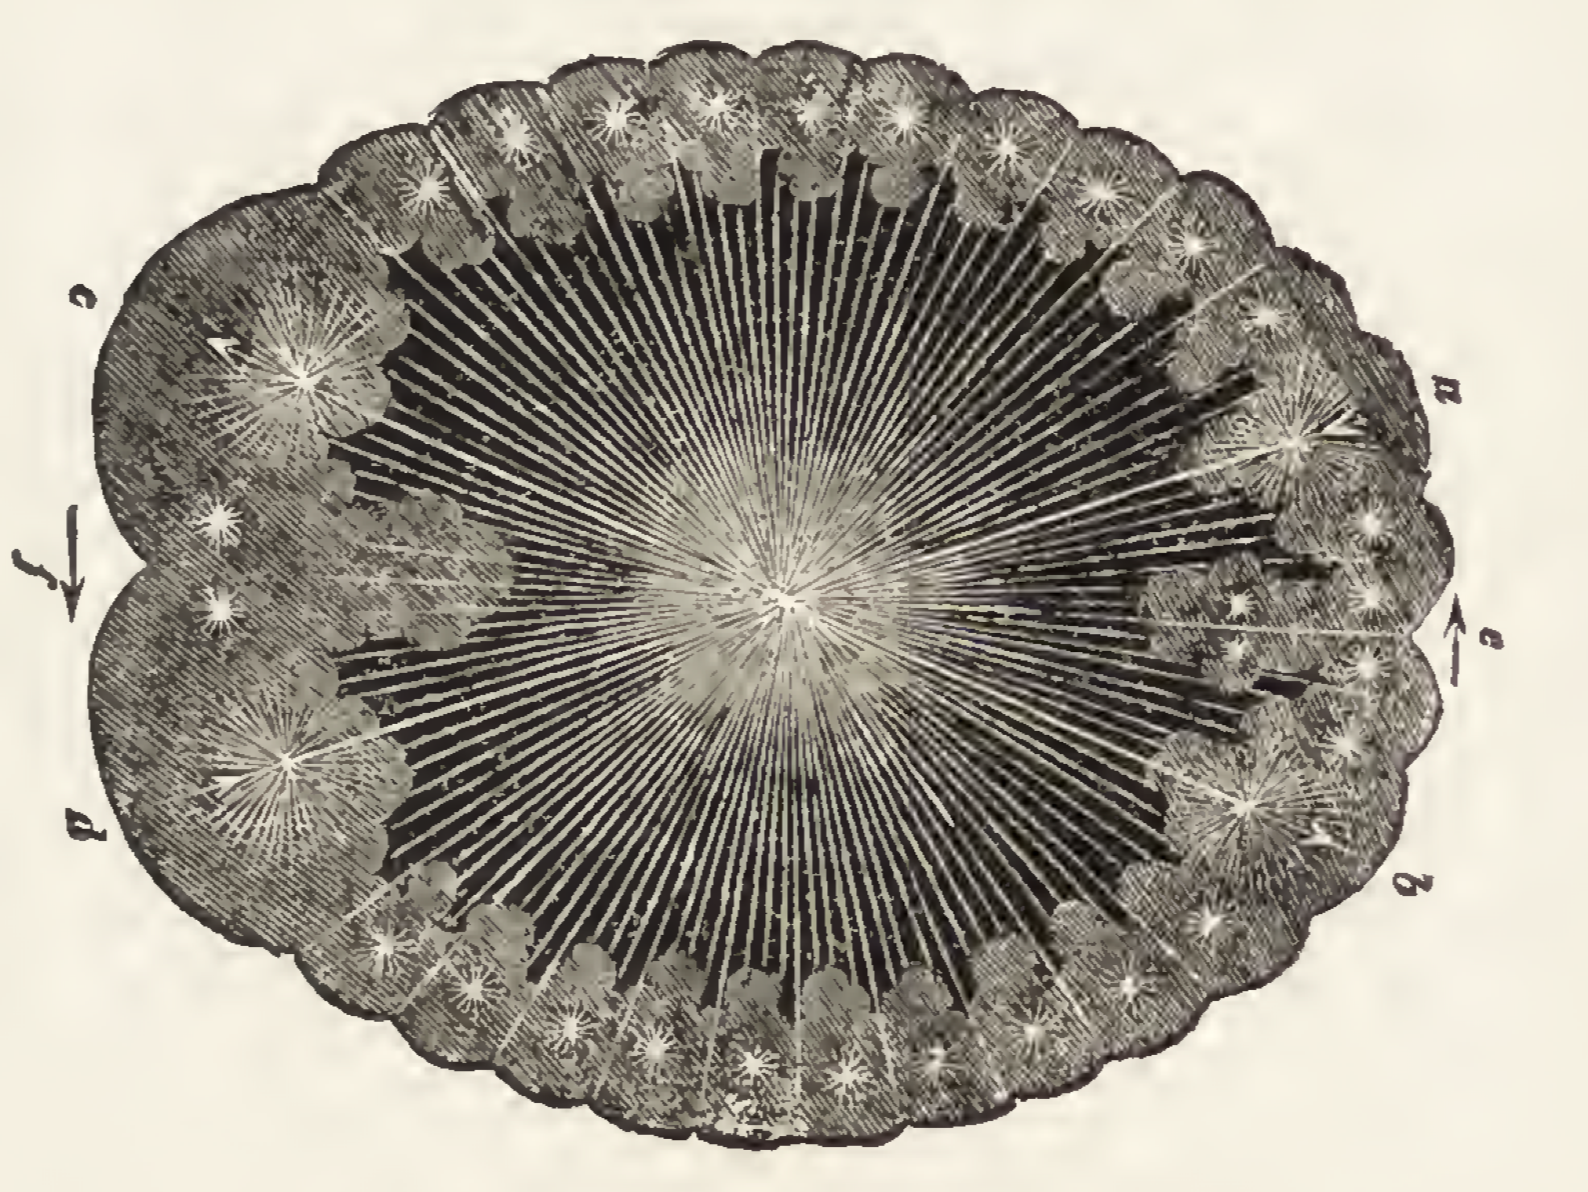 Black-and-white illustration of cross-section of brain with starburst pattern drawn from the center.